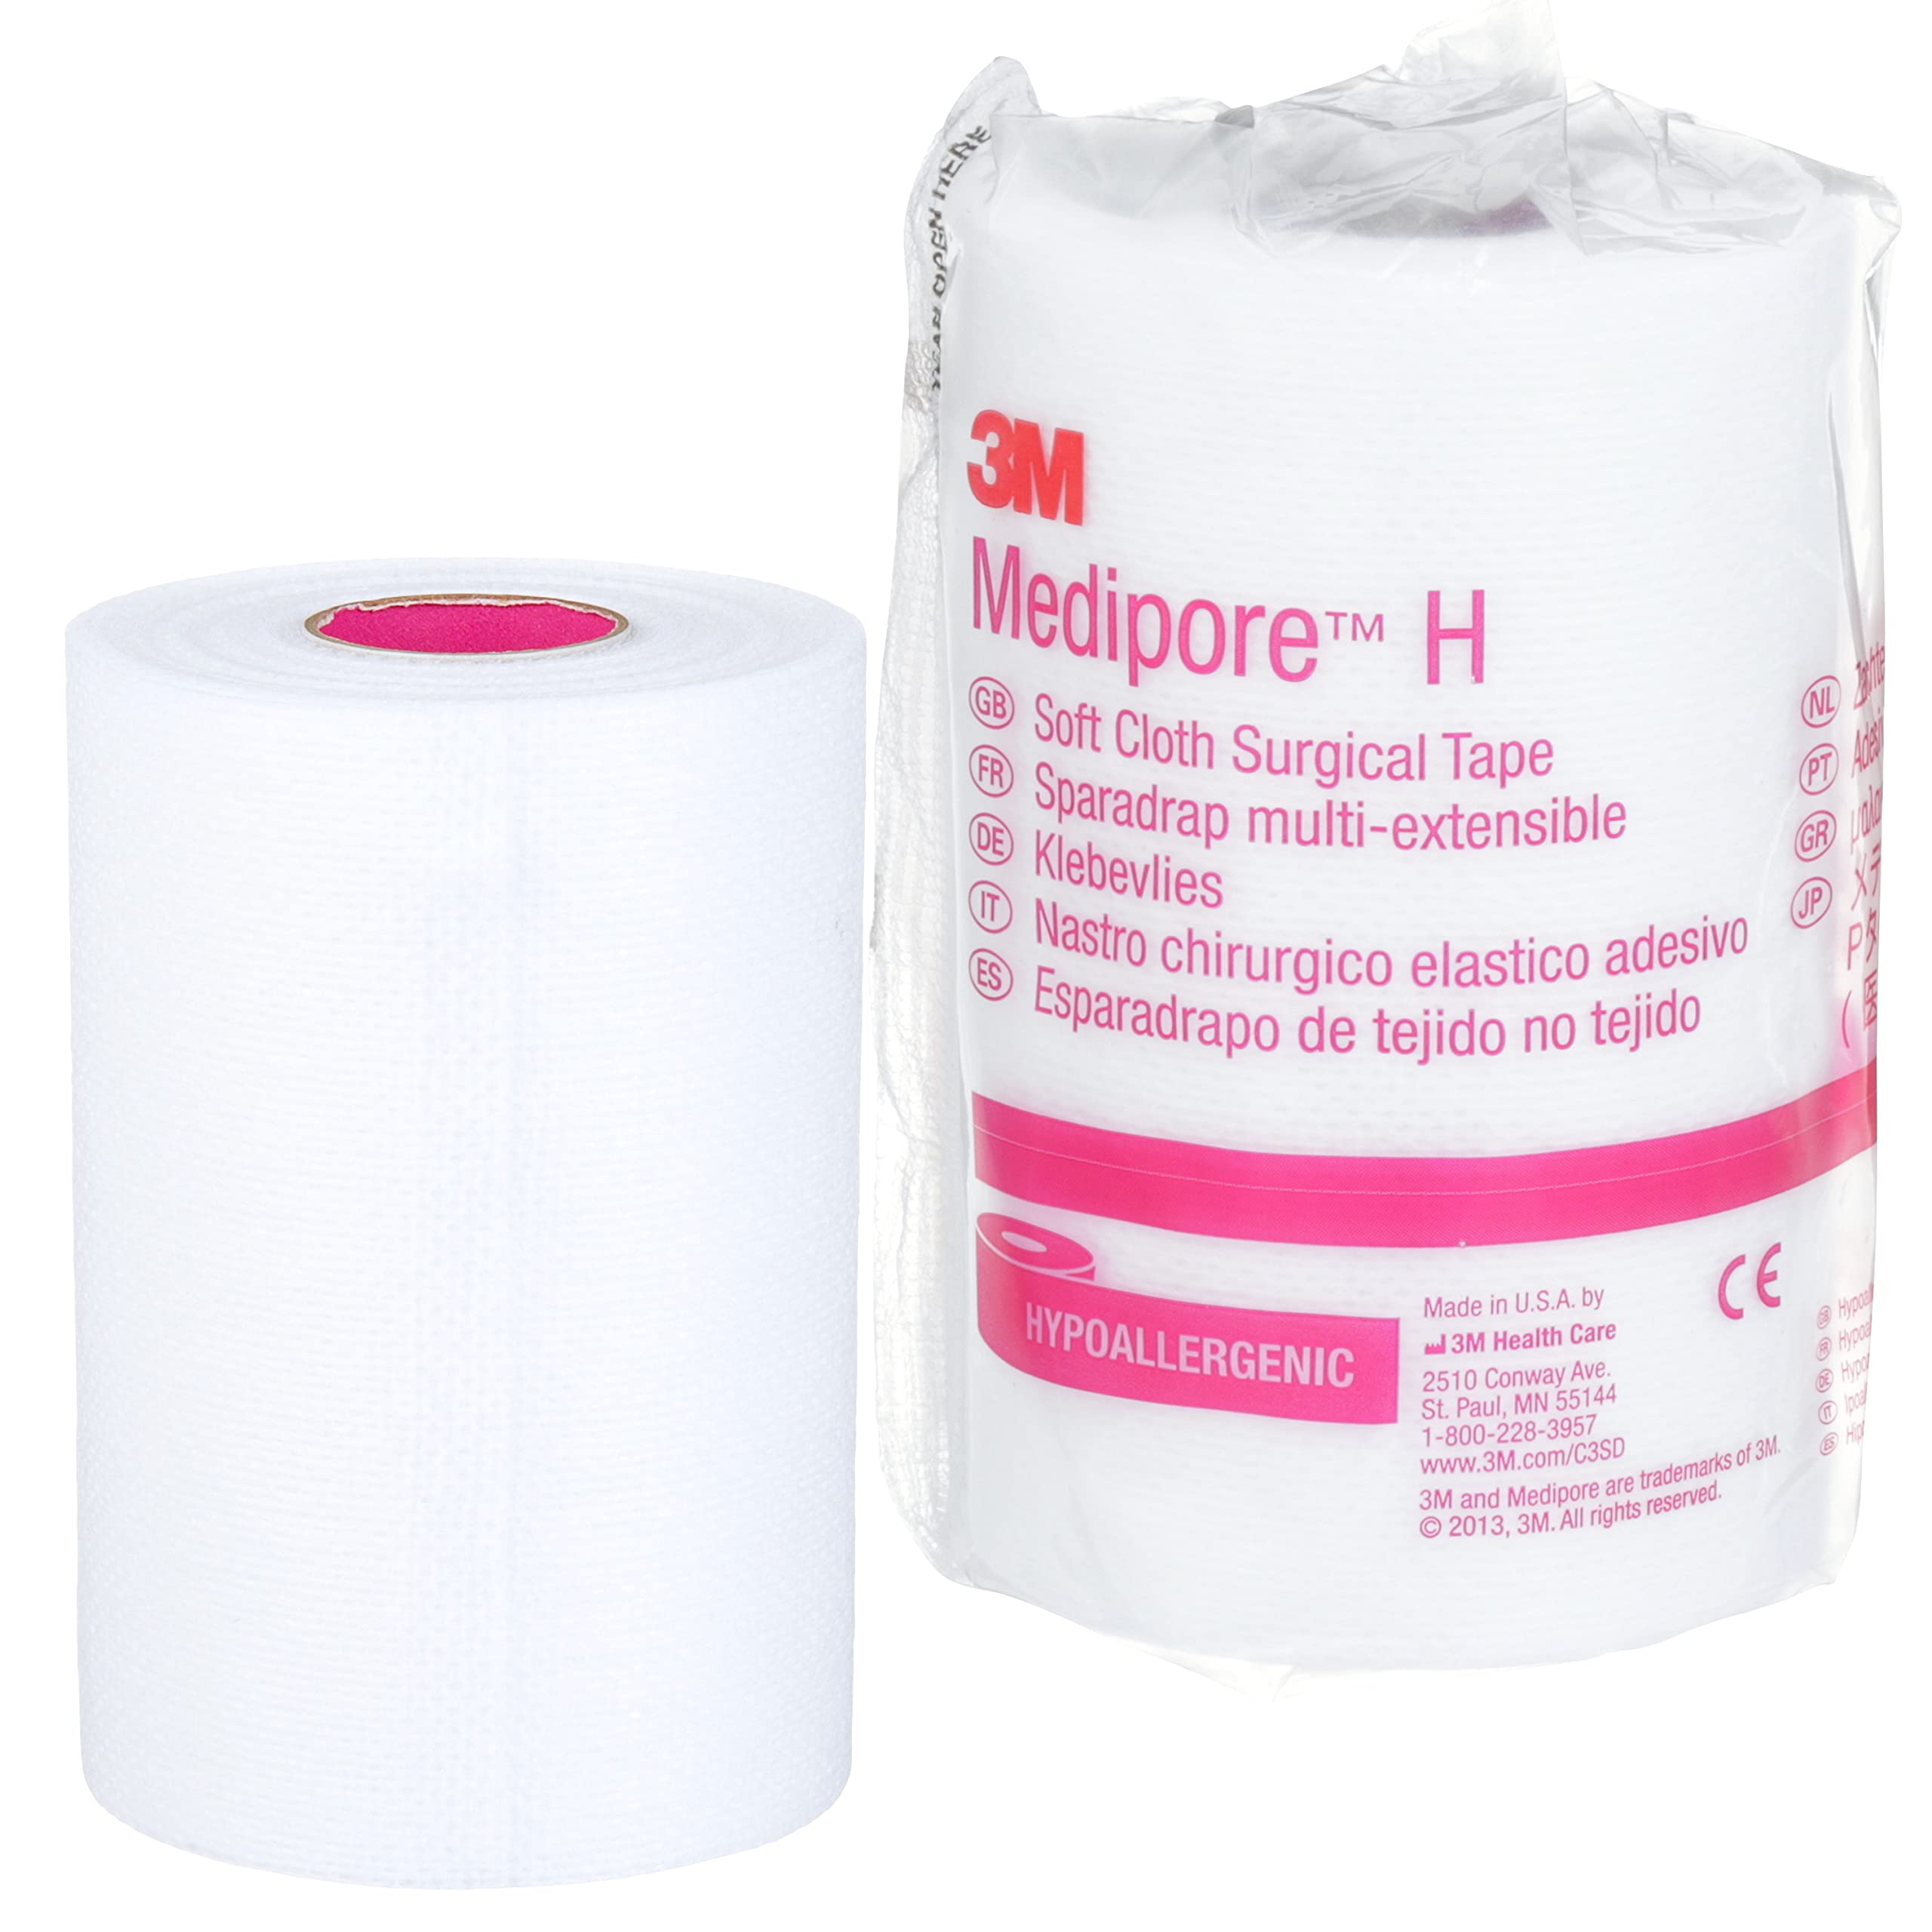 3M Medipore H 2864 Perforated Medical Tape | Soft Cloth NonSterile - White 4 Inch X 10 Yard